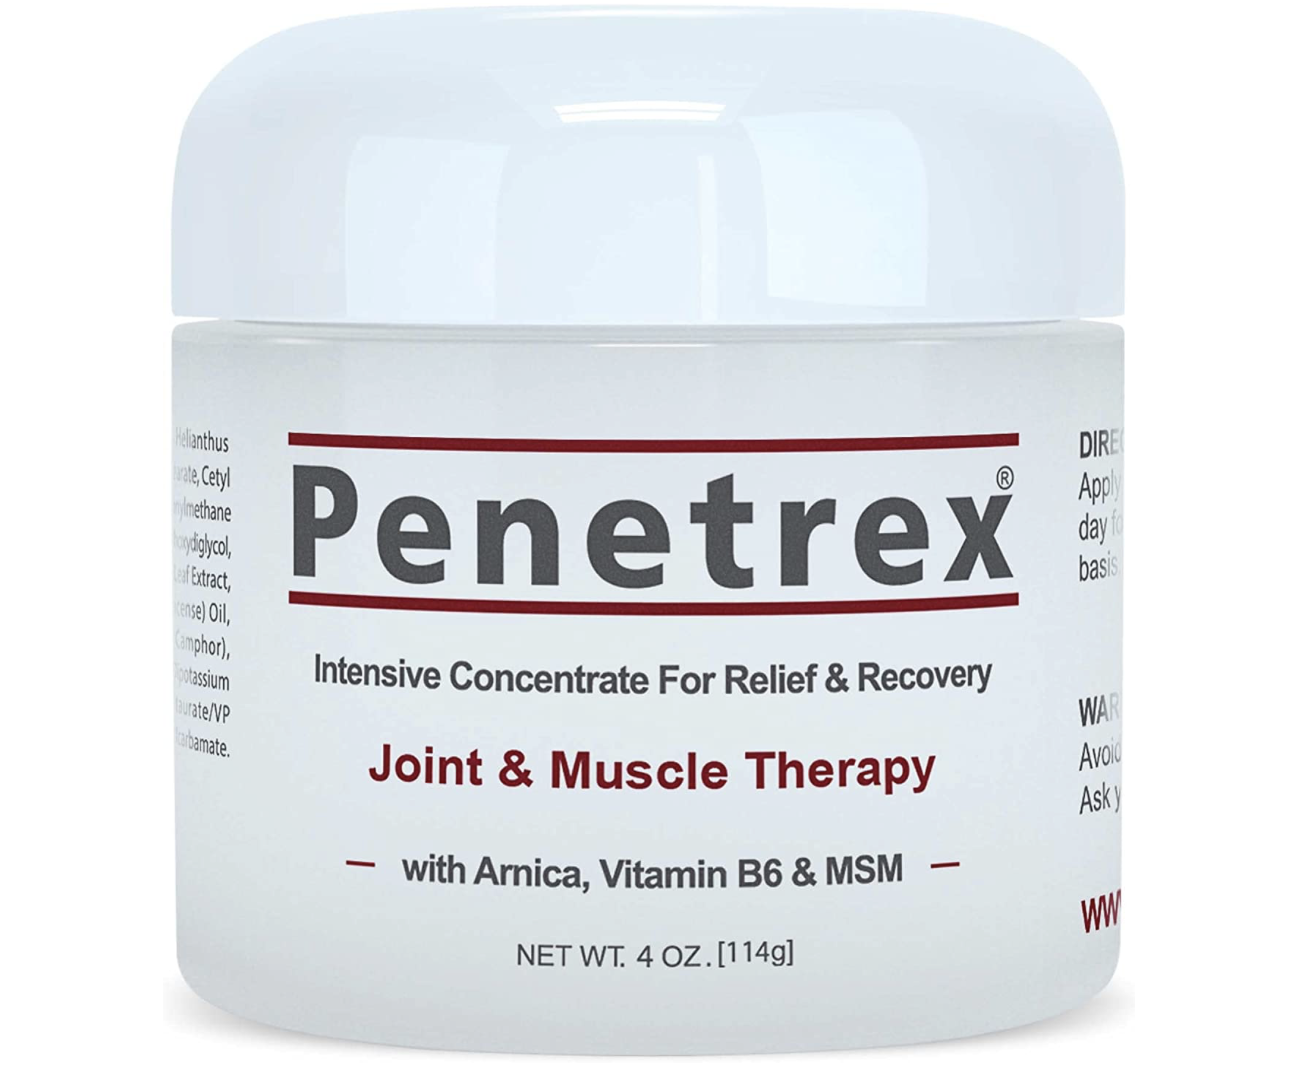 Penetrex Intensive Concentrate for Relief & Recovery